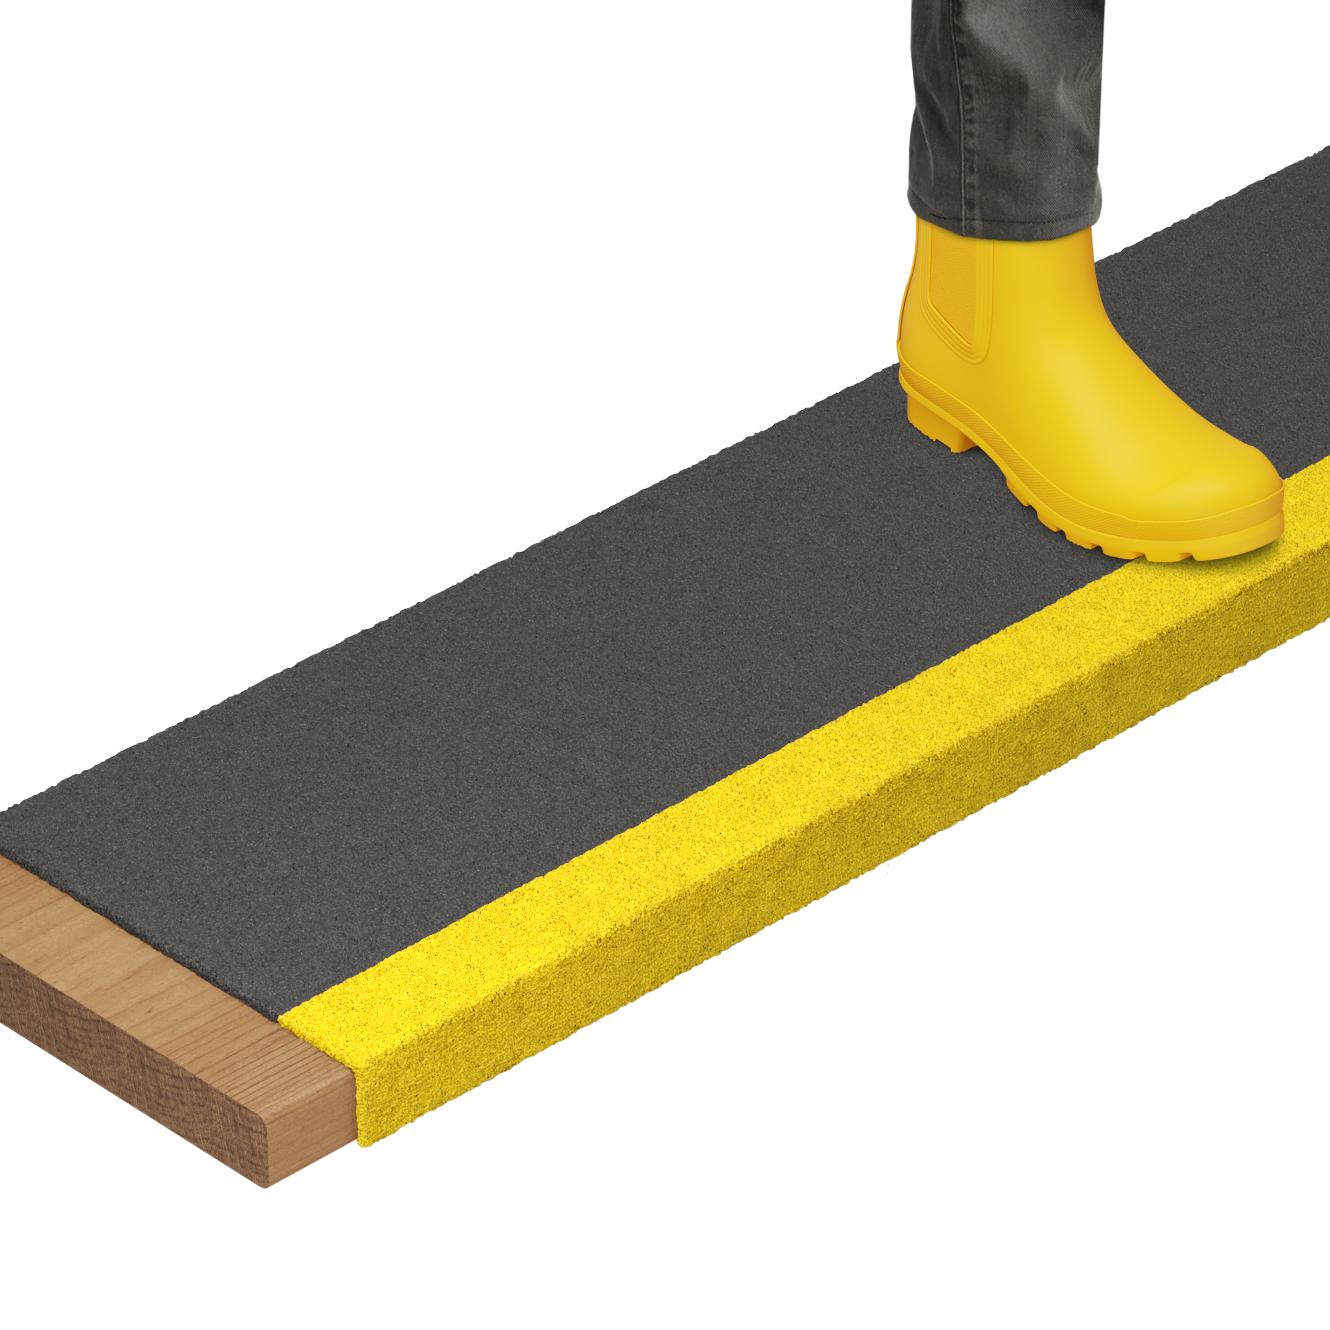 Anti-Slip FRP Stair Tread Cover - Black with Yellow Nosing